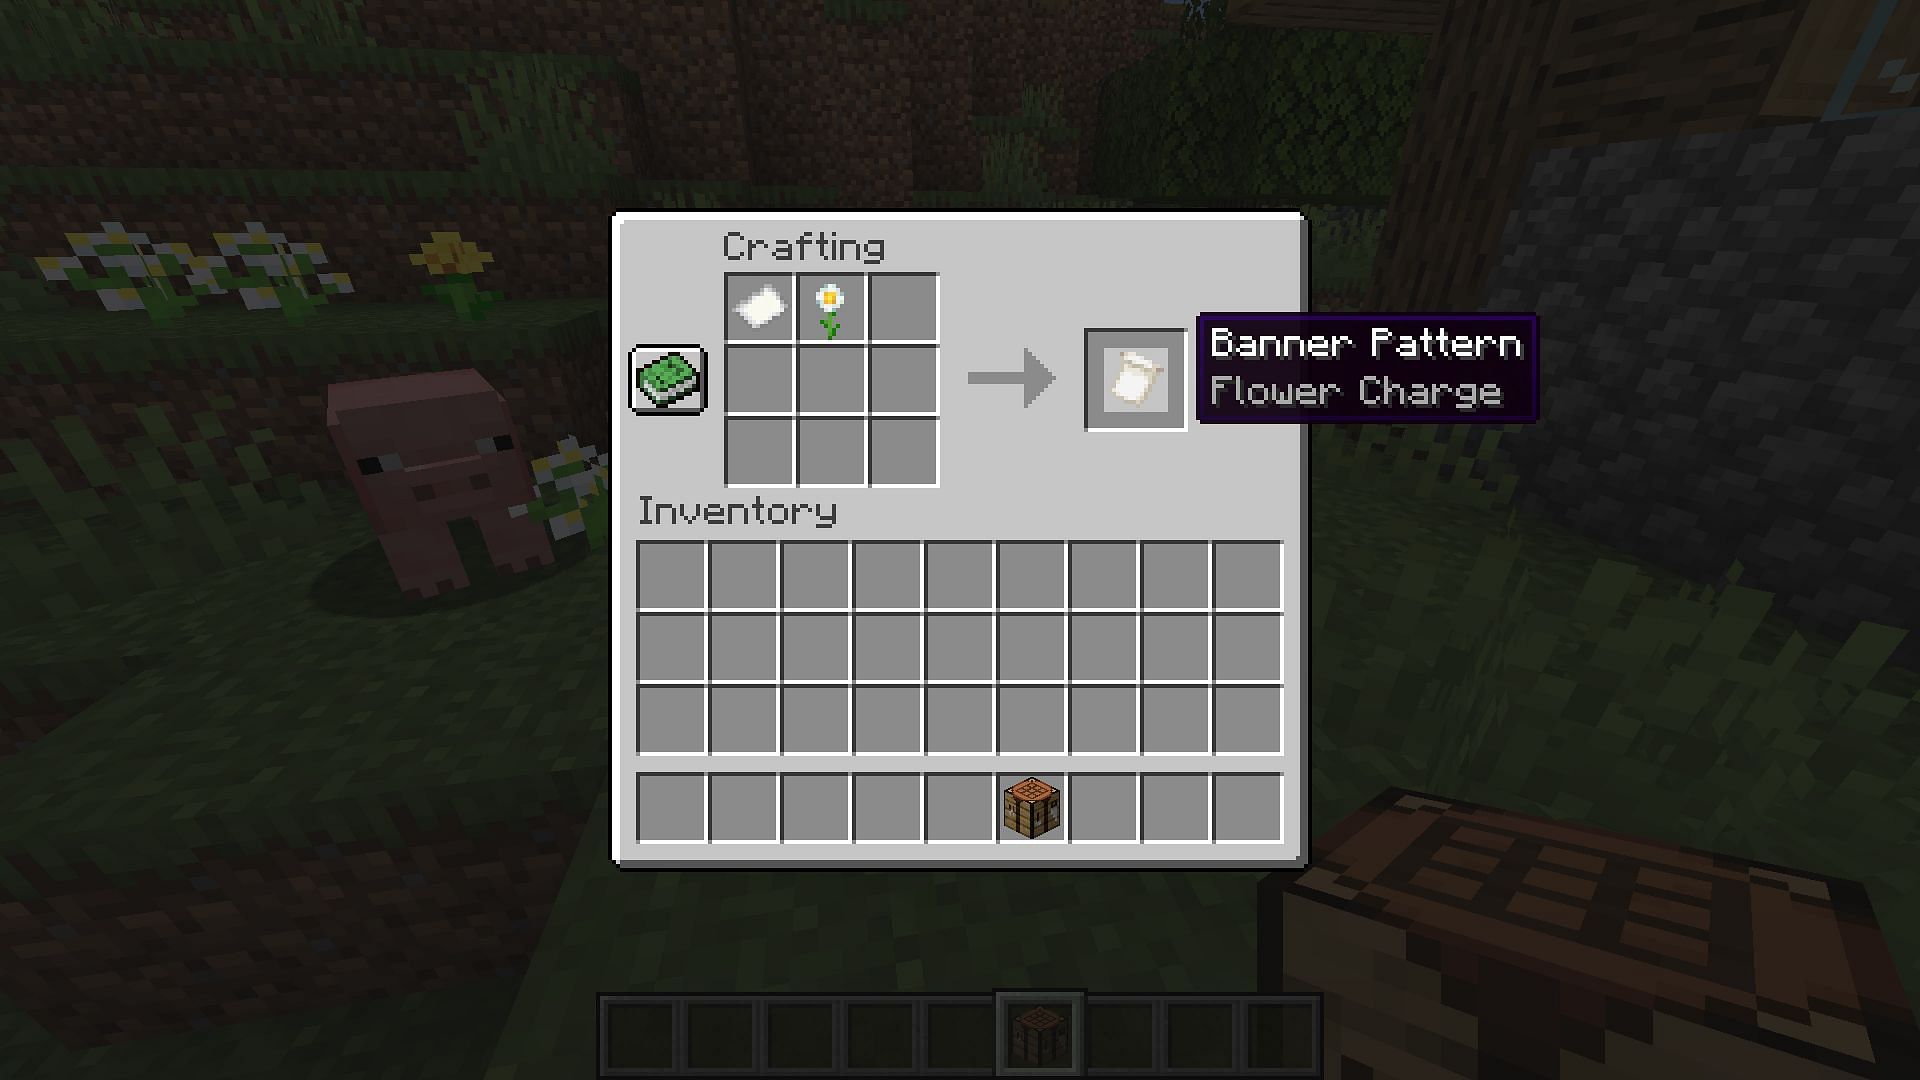 Crafting a flower charge banner pattern is the easiest since players only need a daisy (Image via Minecraft 1.19)